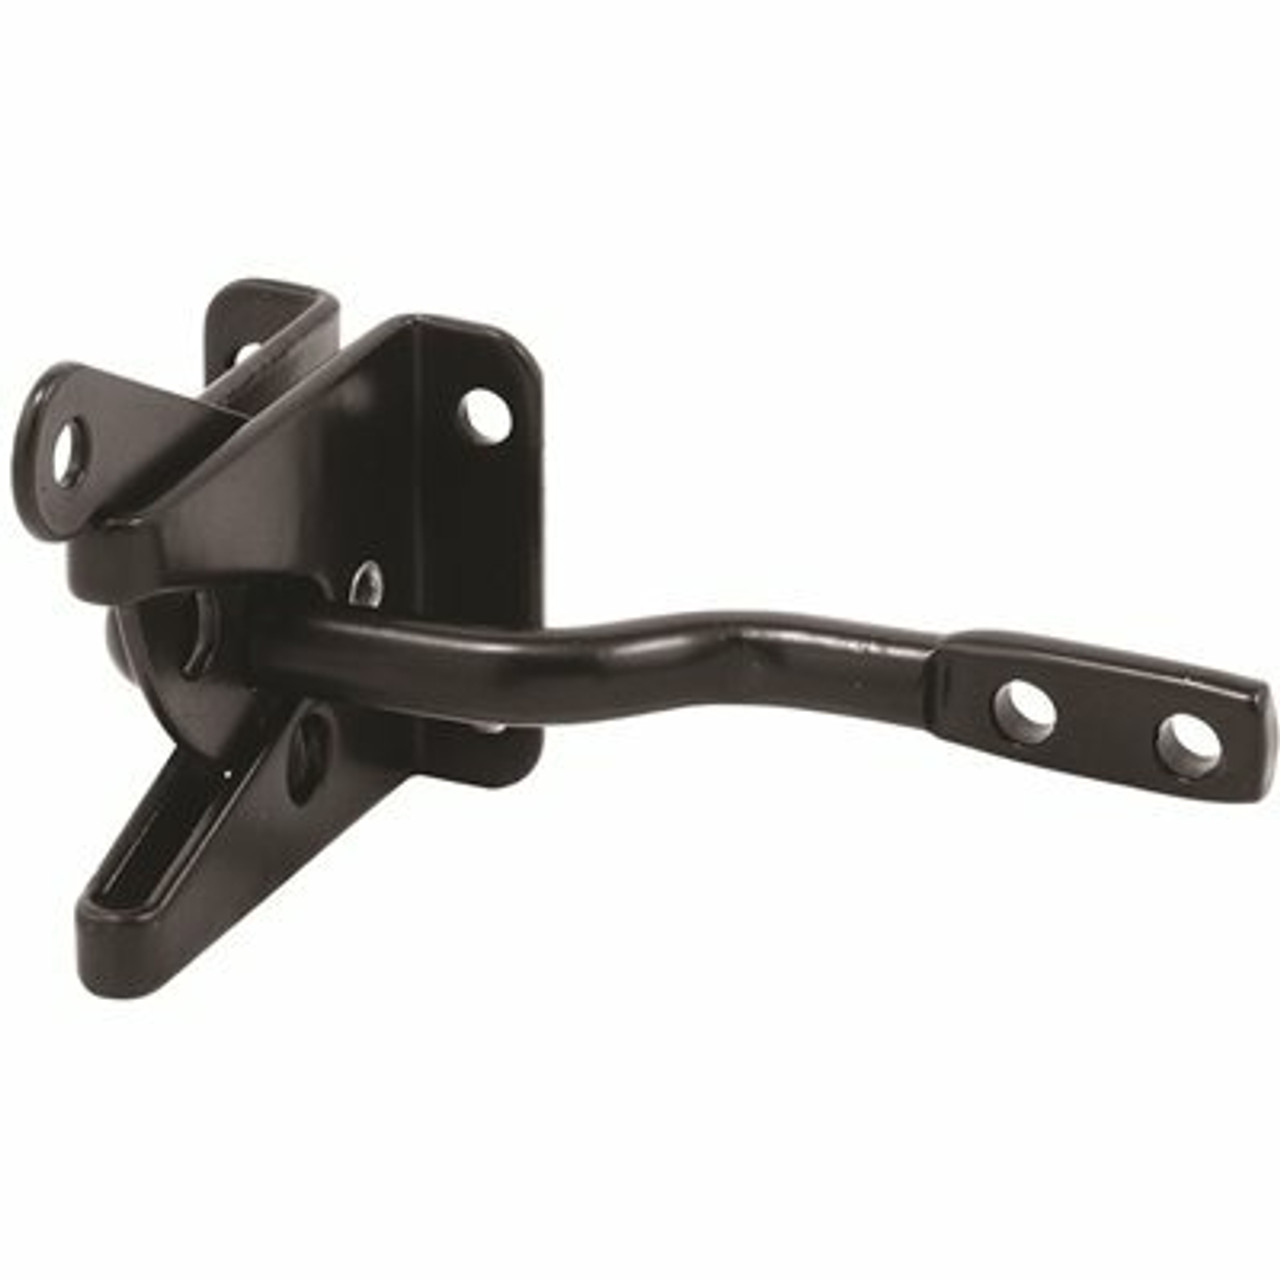 Prime-Line Gate Latch And Strike Set, 1-7/8 In. X 1-9/16 In., Steel, Painted Black